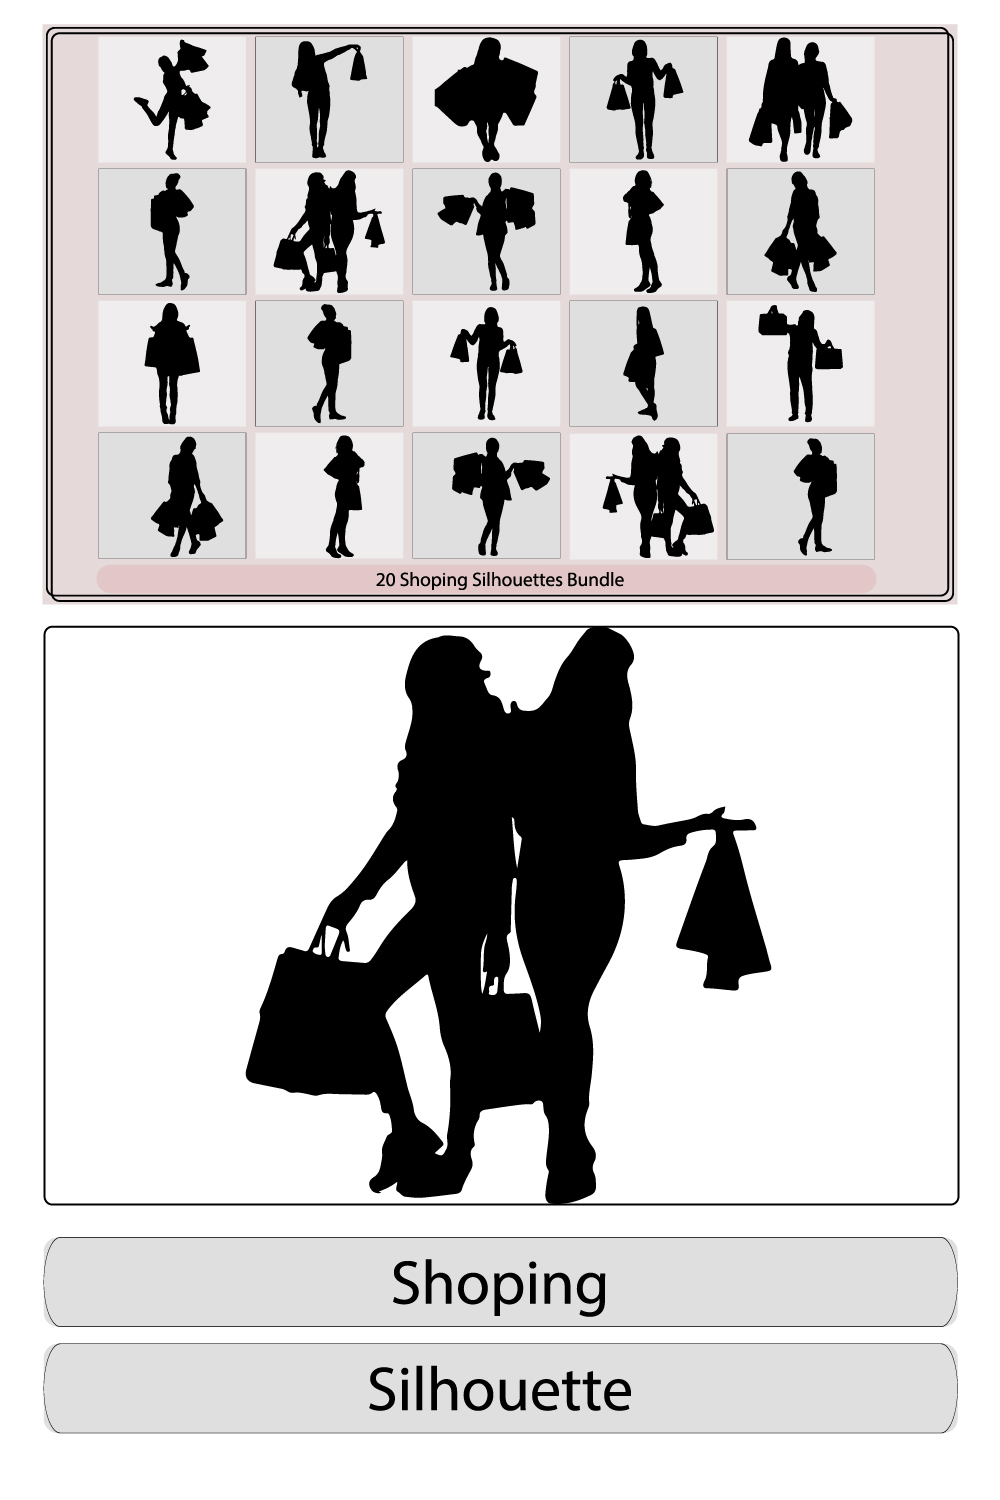 Women Shopping Silhouettes,several people, shopping,Shopping family and girls silhouettes, pinterest preview image.